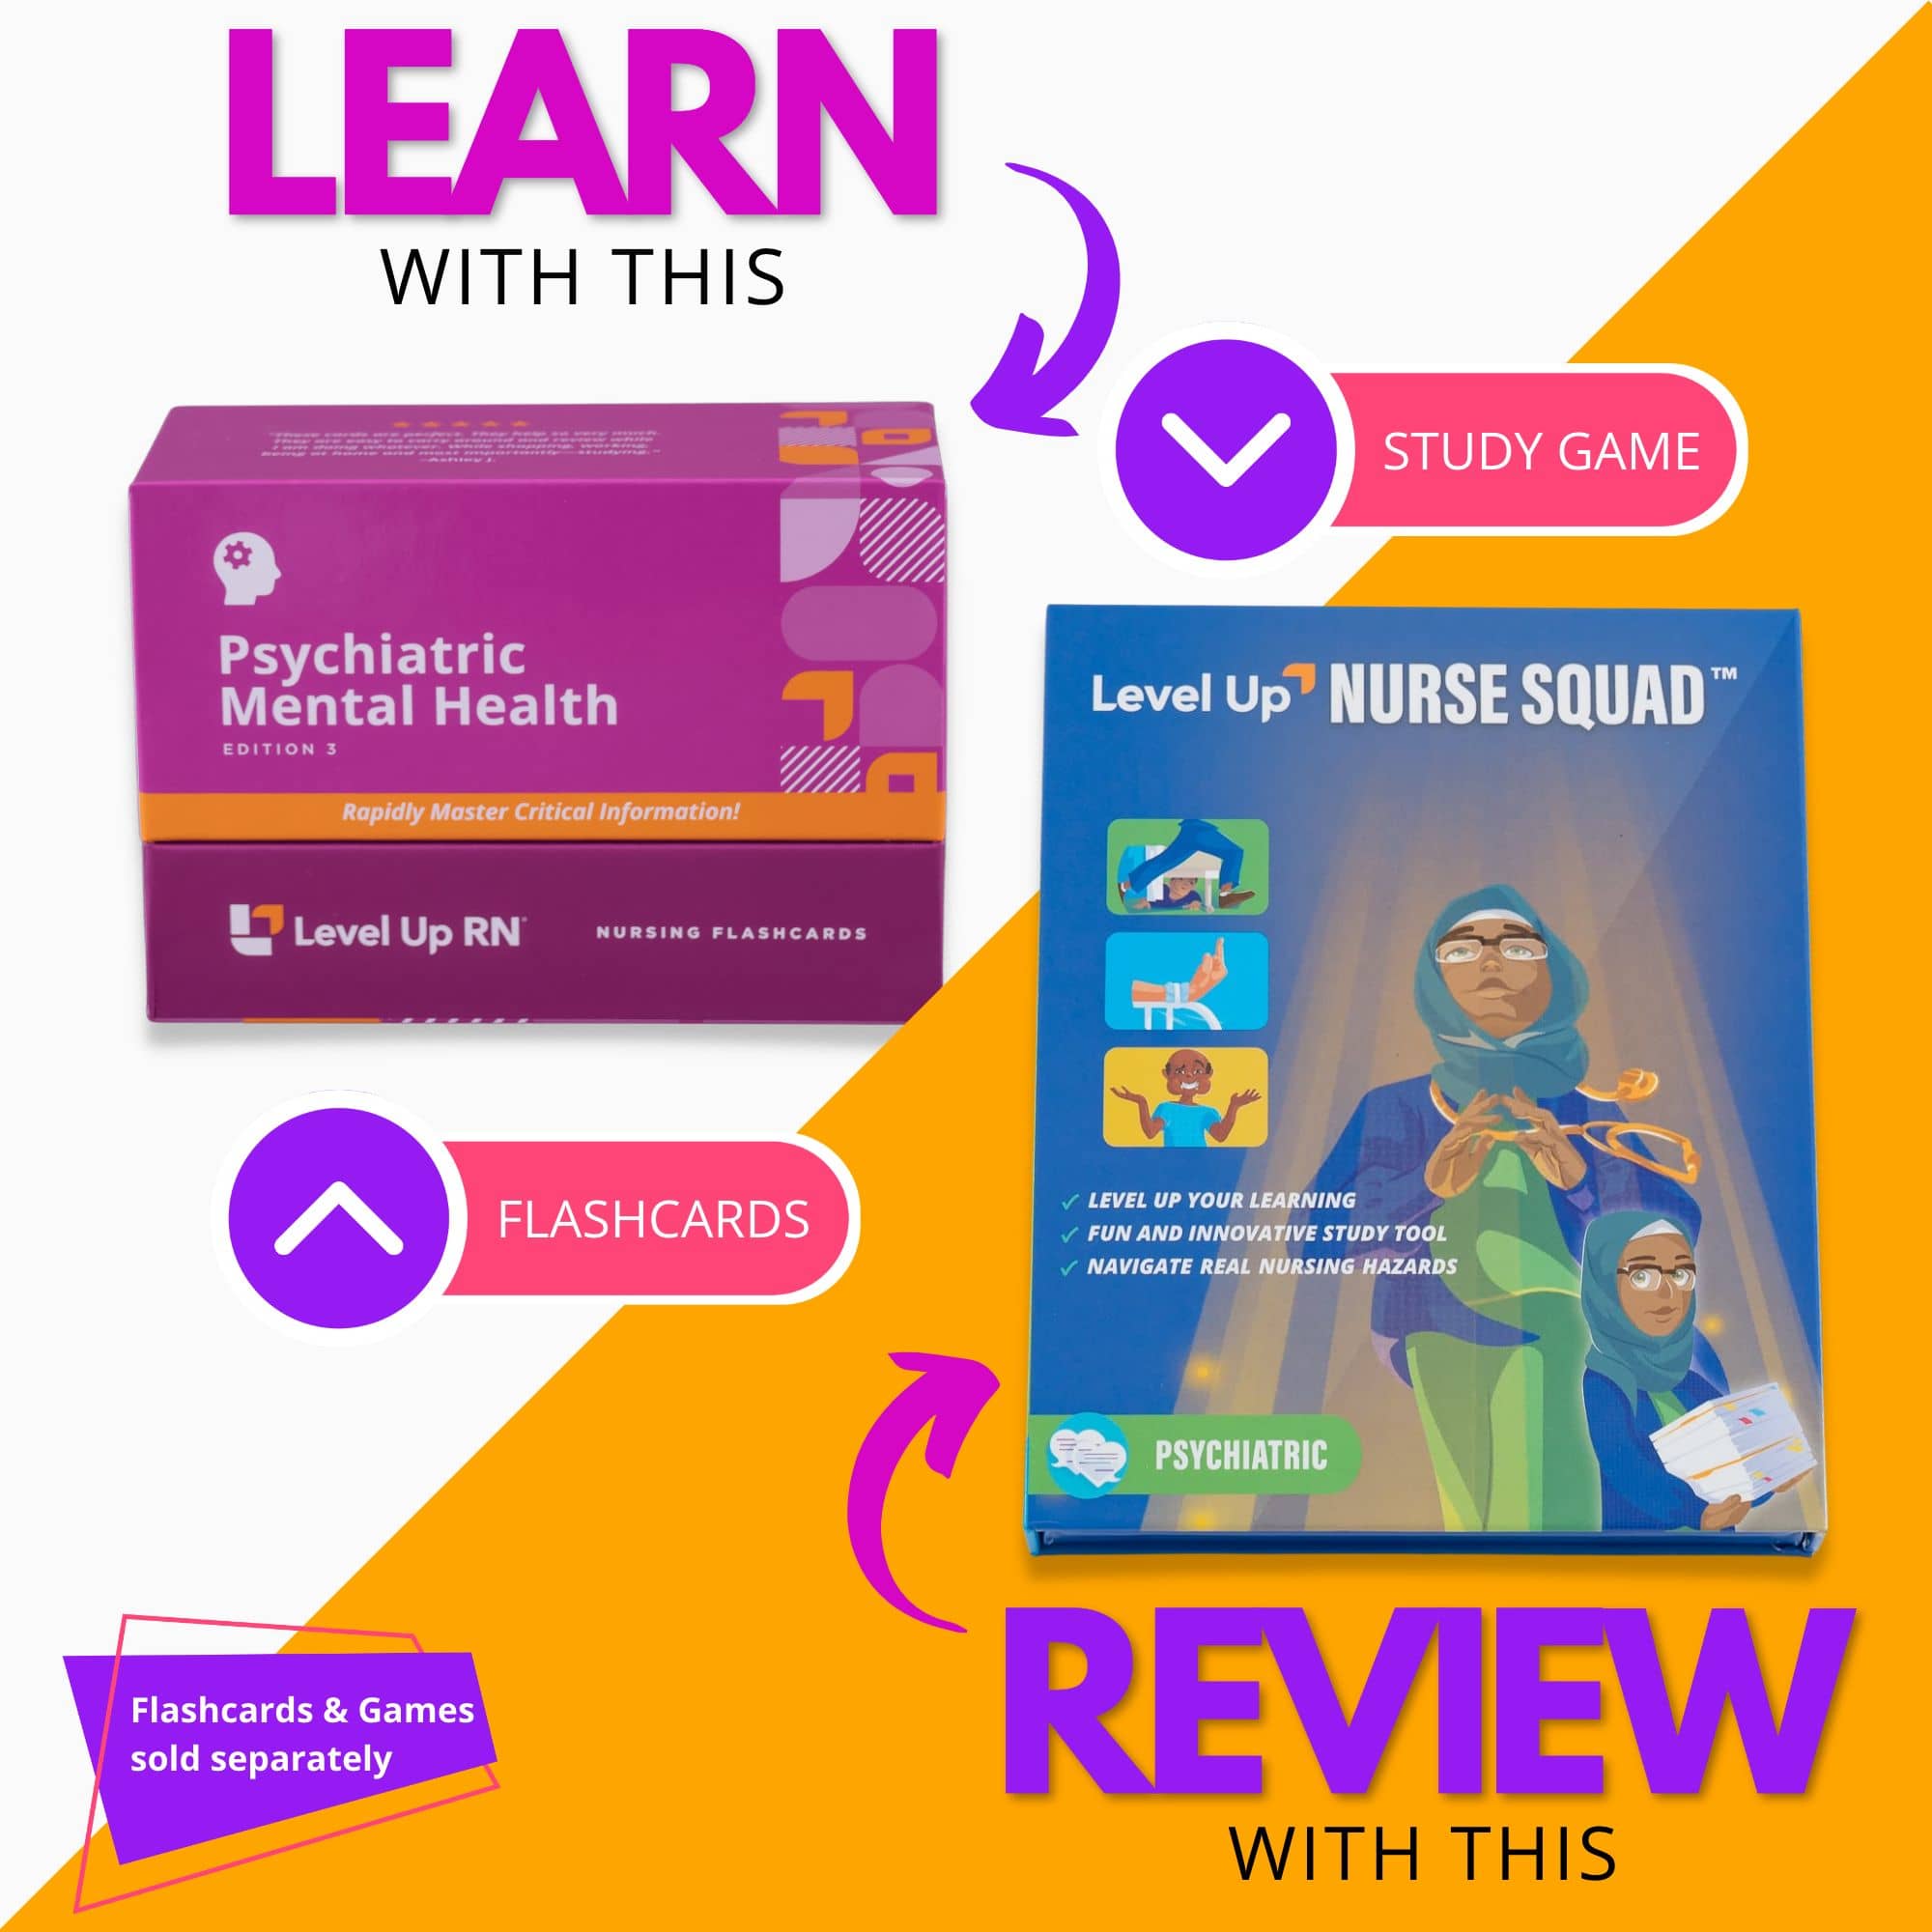 Learn with the flashcards, review with the study game (sold separately)